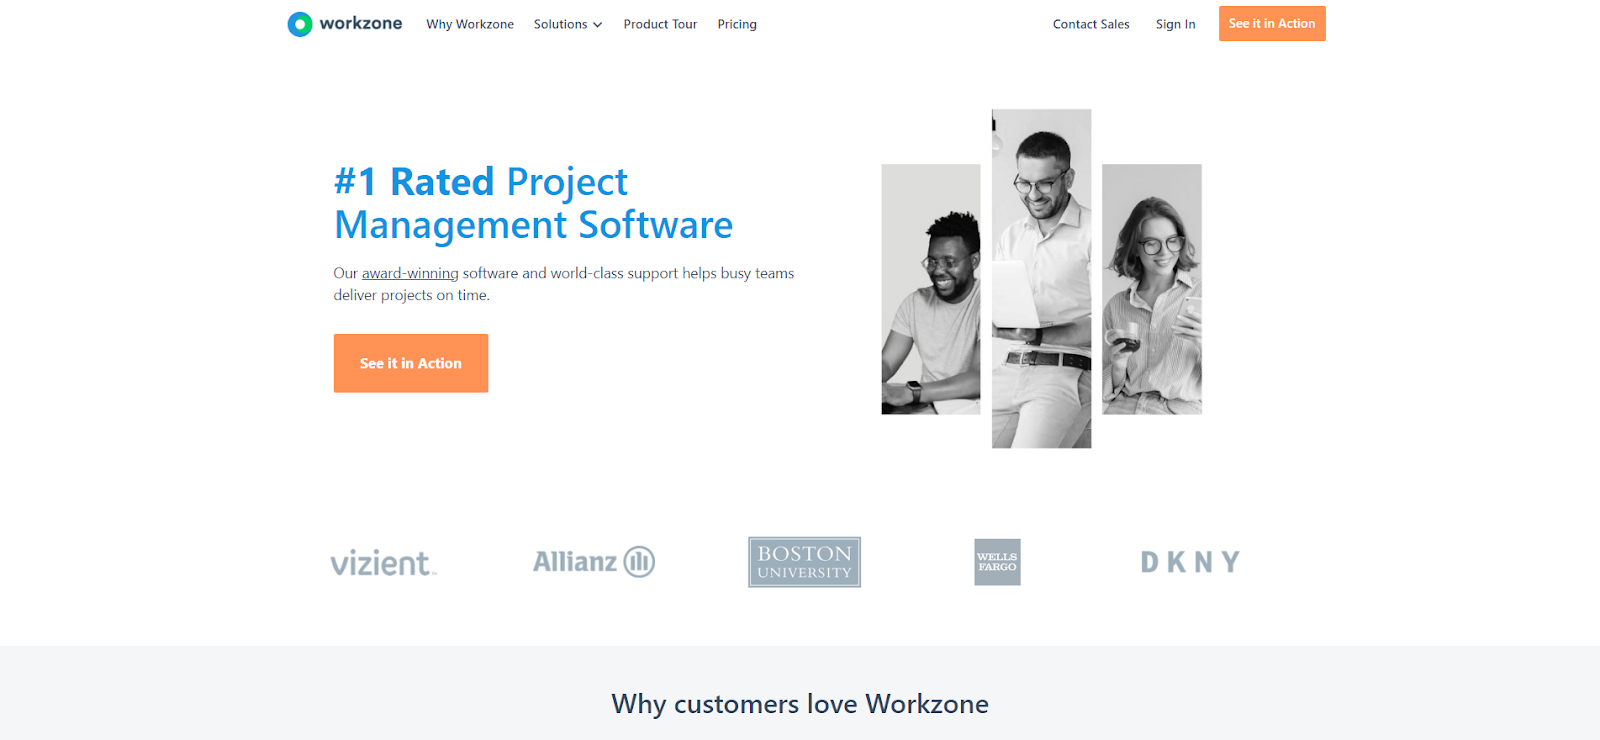 40 Best Project Management Tools & Software Softlist.io